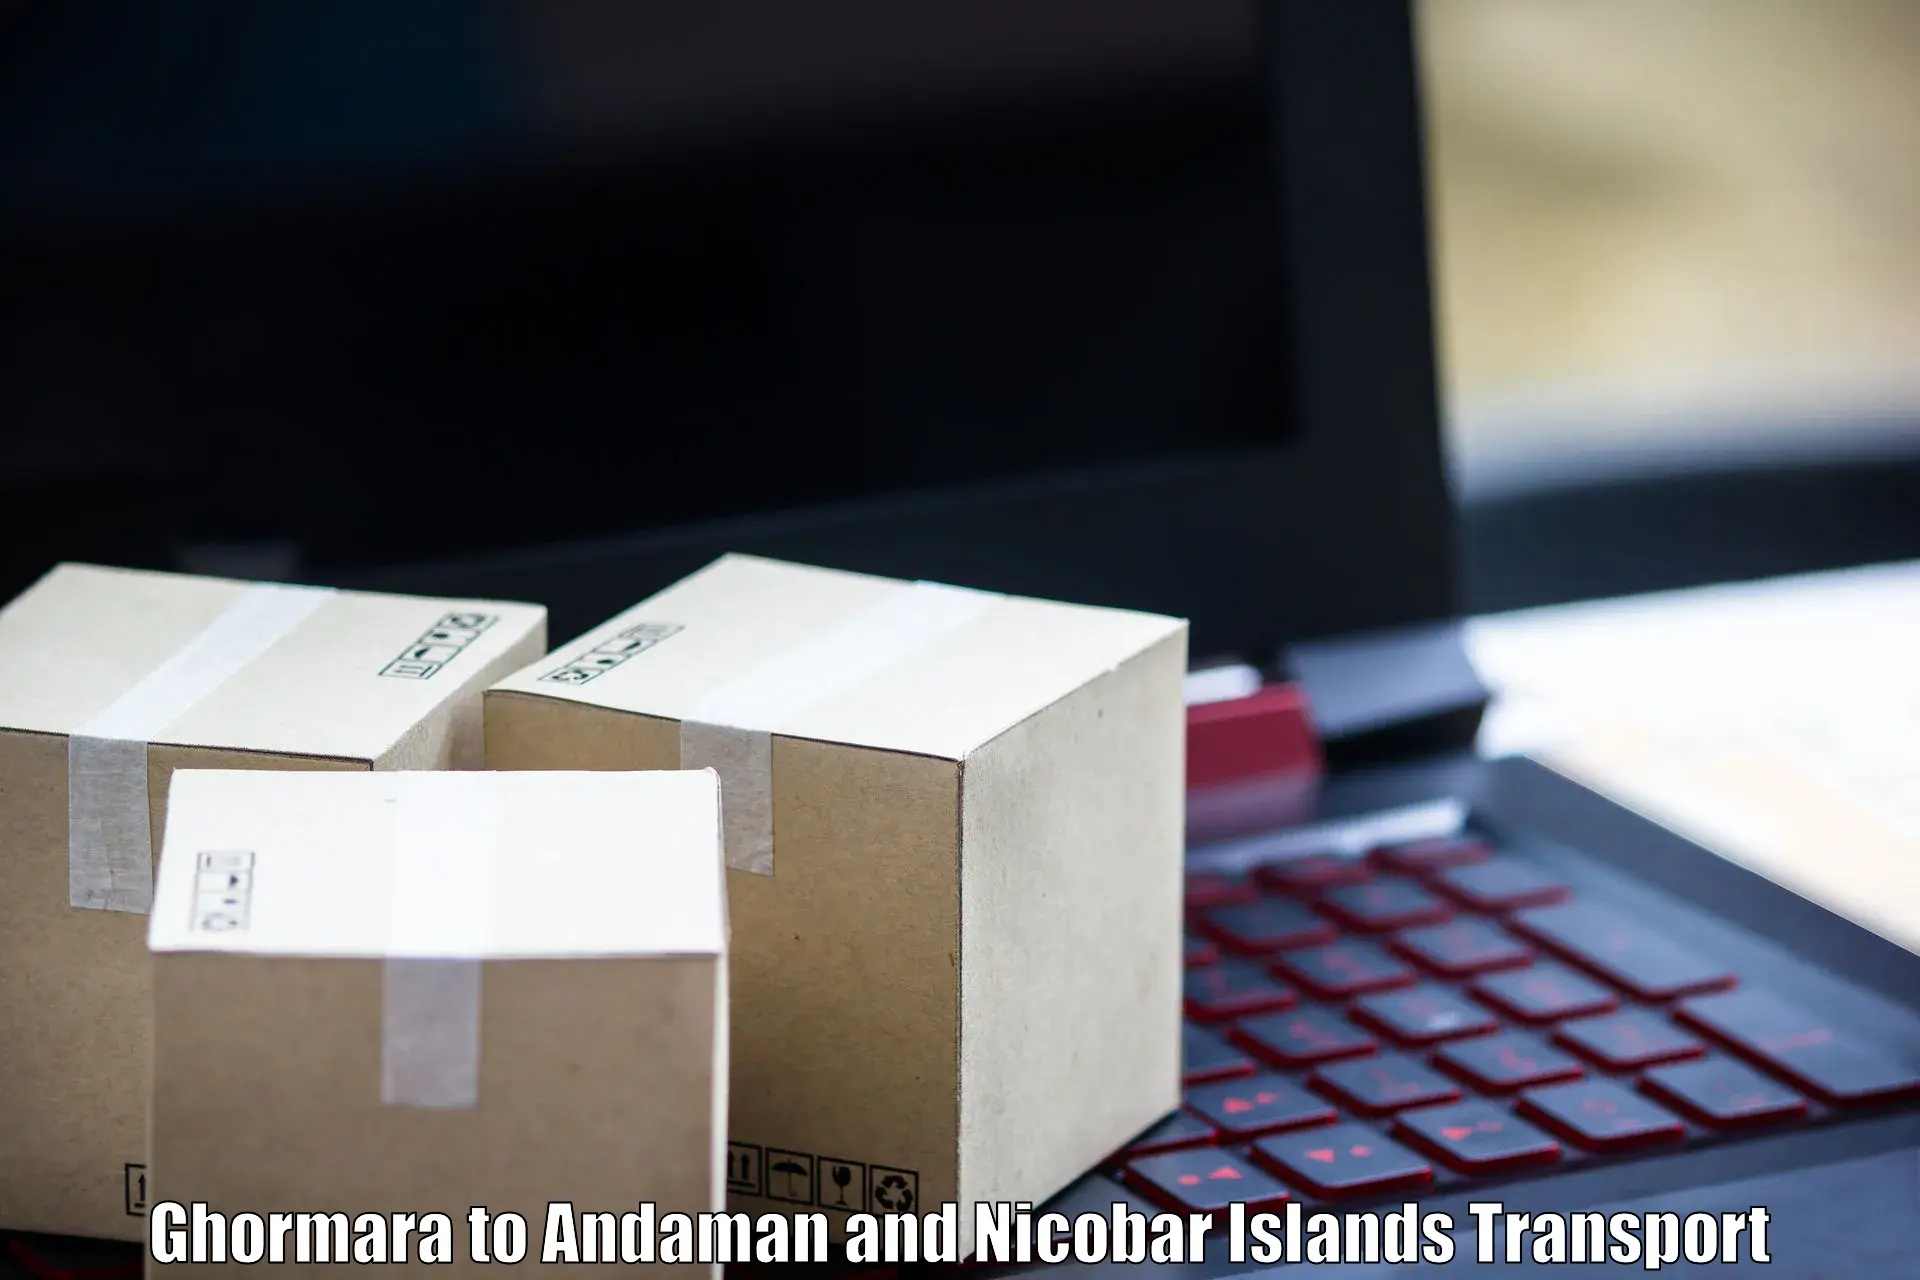 Express transport services in Ghormara to Andaman and Nicobar Islands